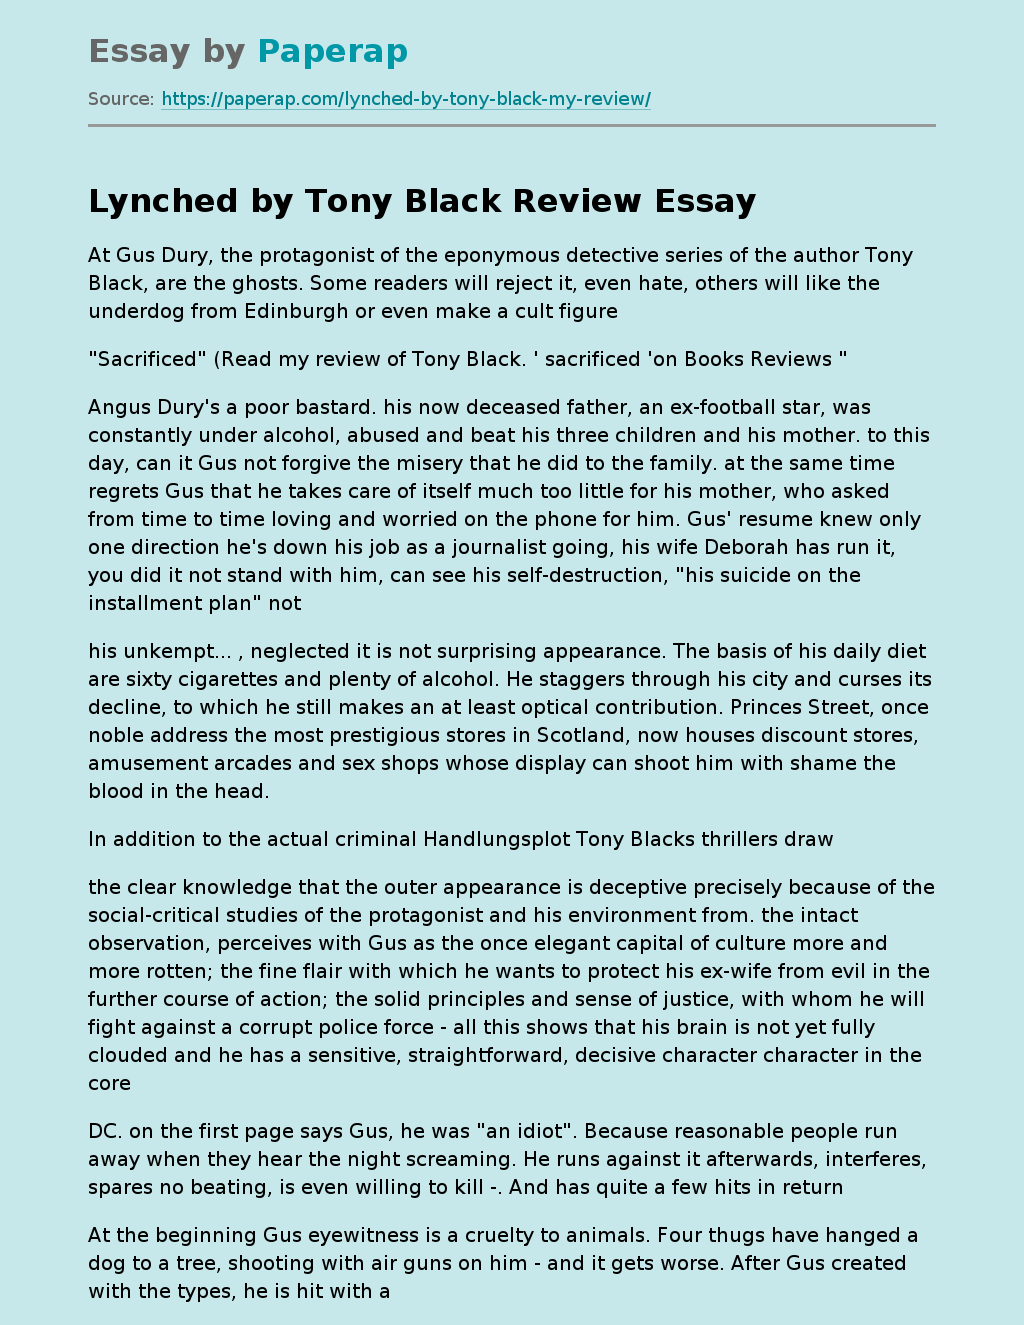 "Lynched" by Tony Black